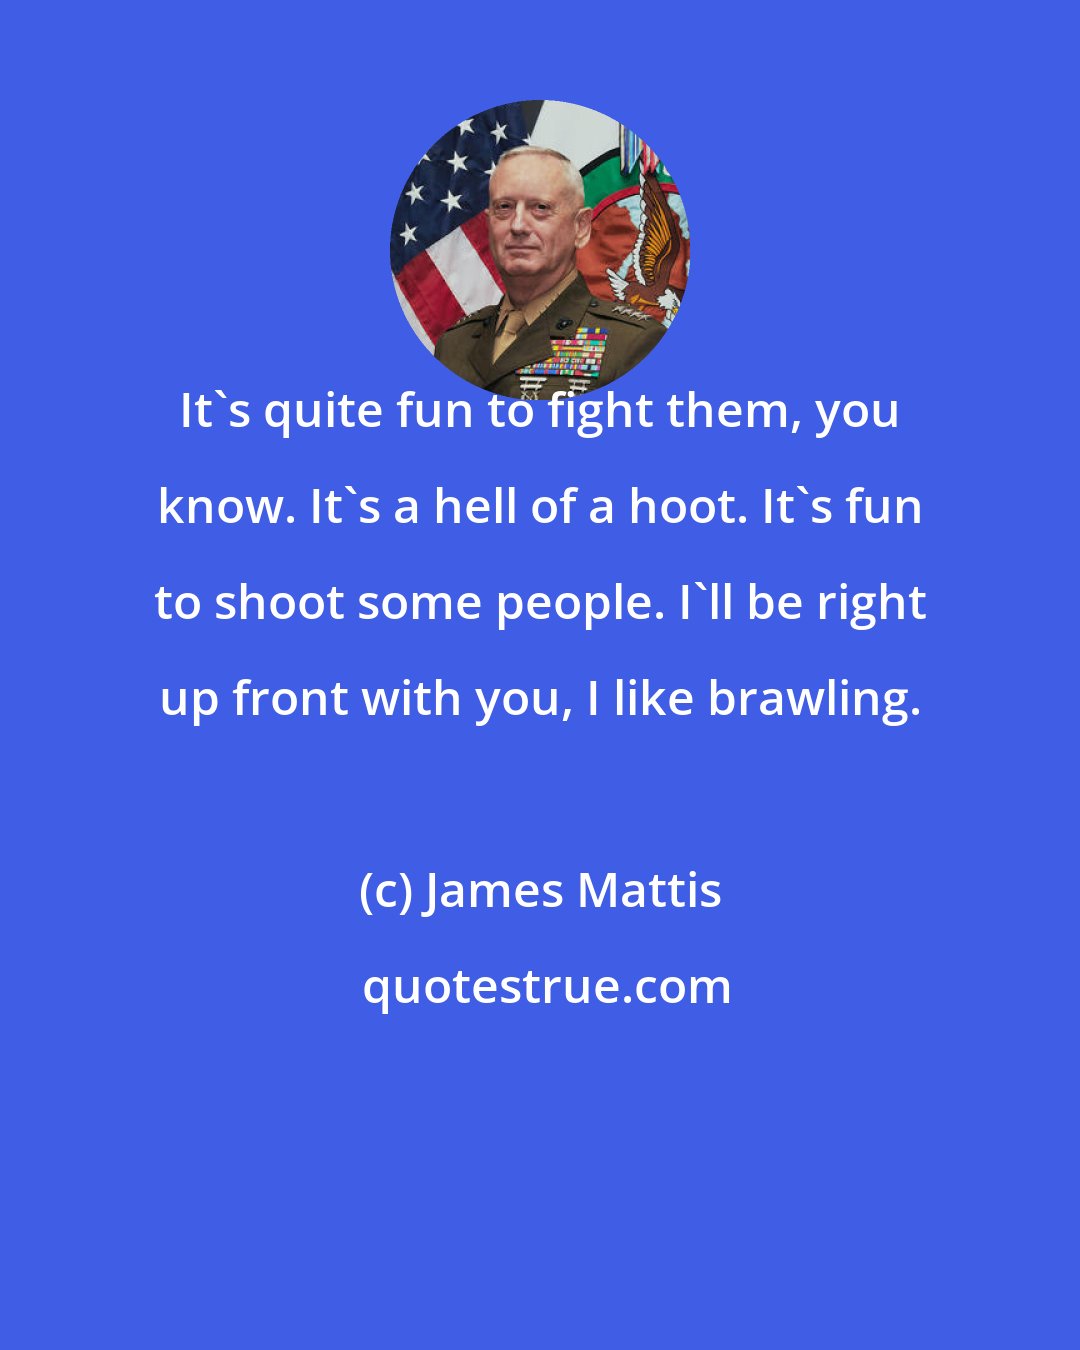 James Mattis: It's quite fun to fight them, you know. It's a hell of a hoot. It's fun to shoot some people. I'll be right up front with you, I like brawling.